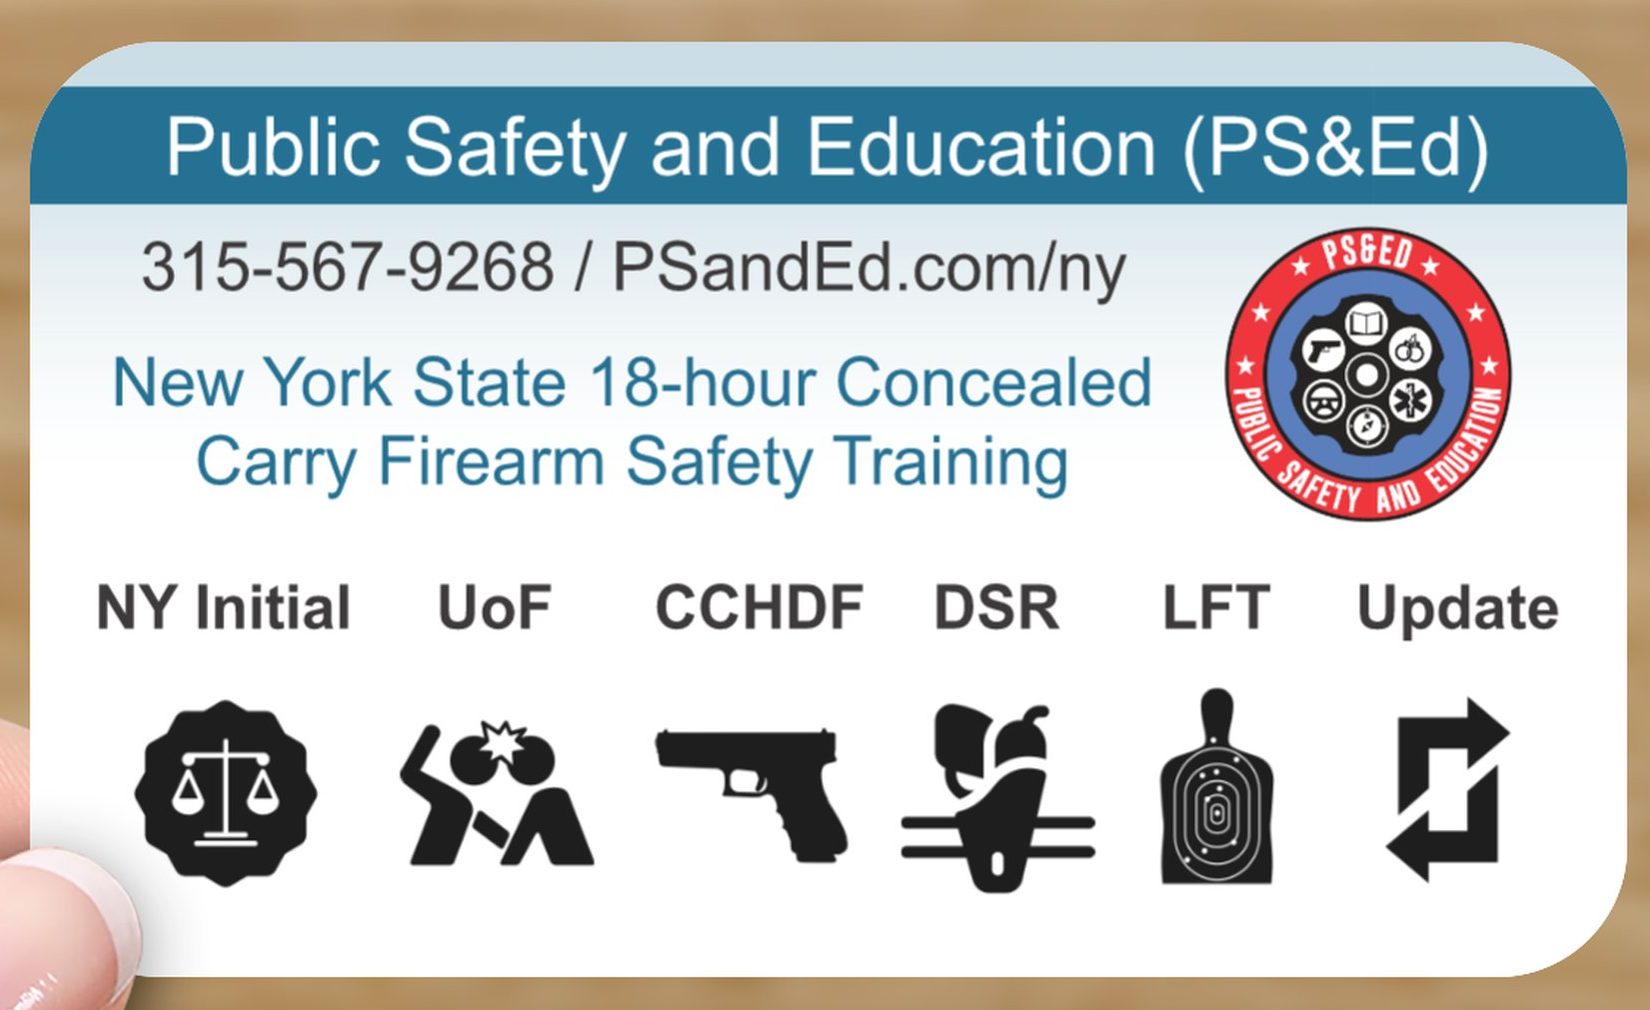 New York State Concealed Carry Firearm Safety Training PS Ed Public